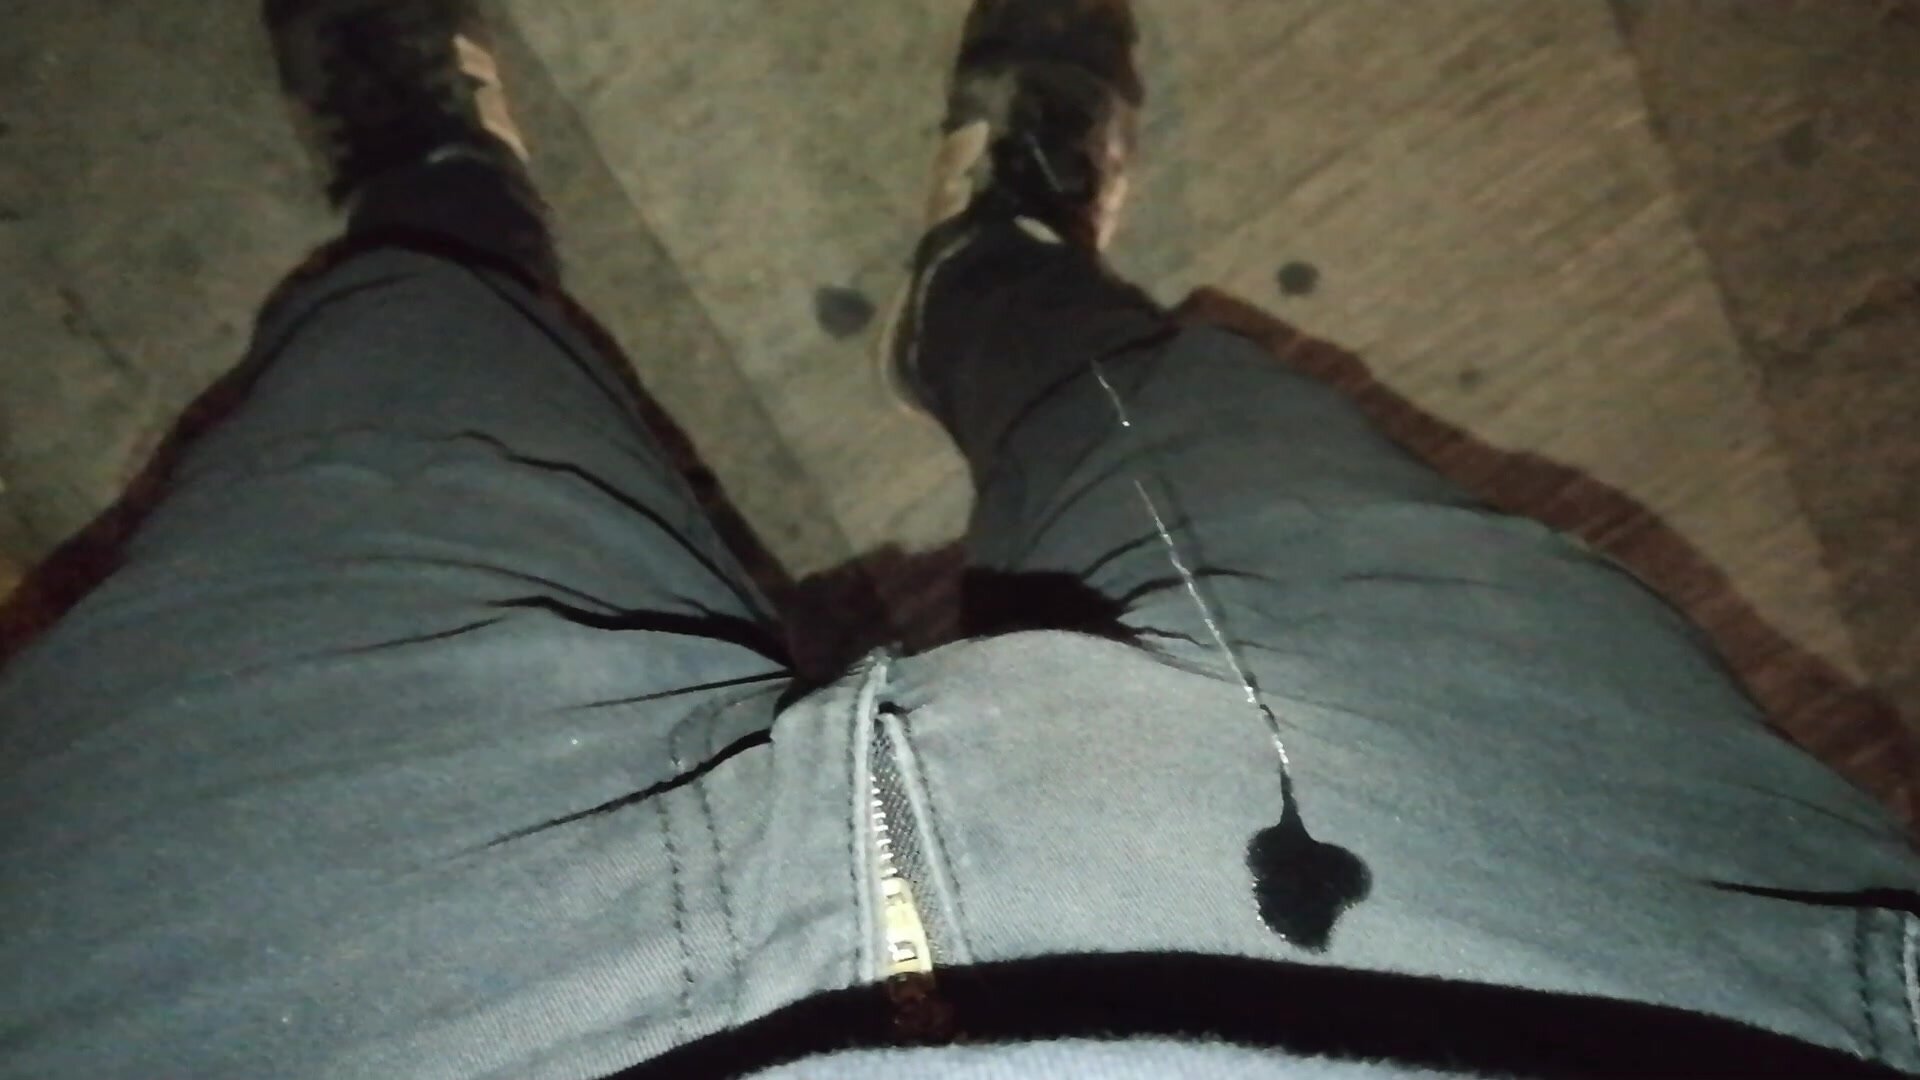 Caught wetting at night on the street